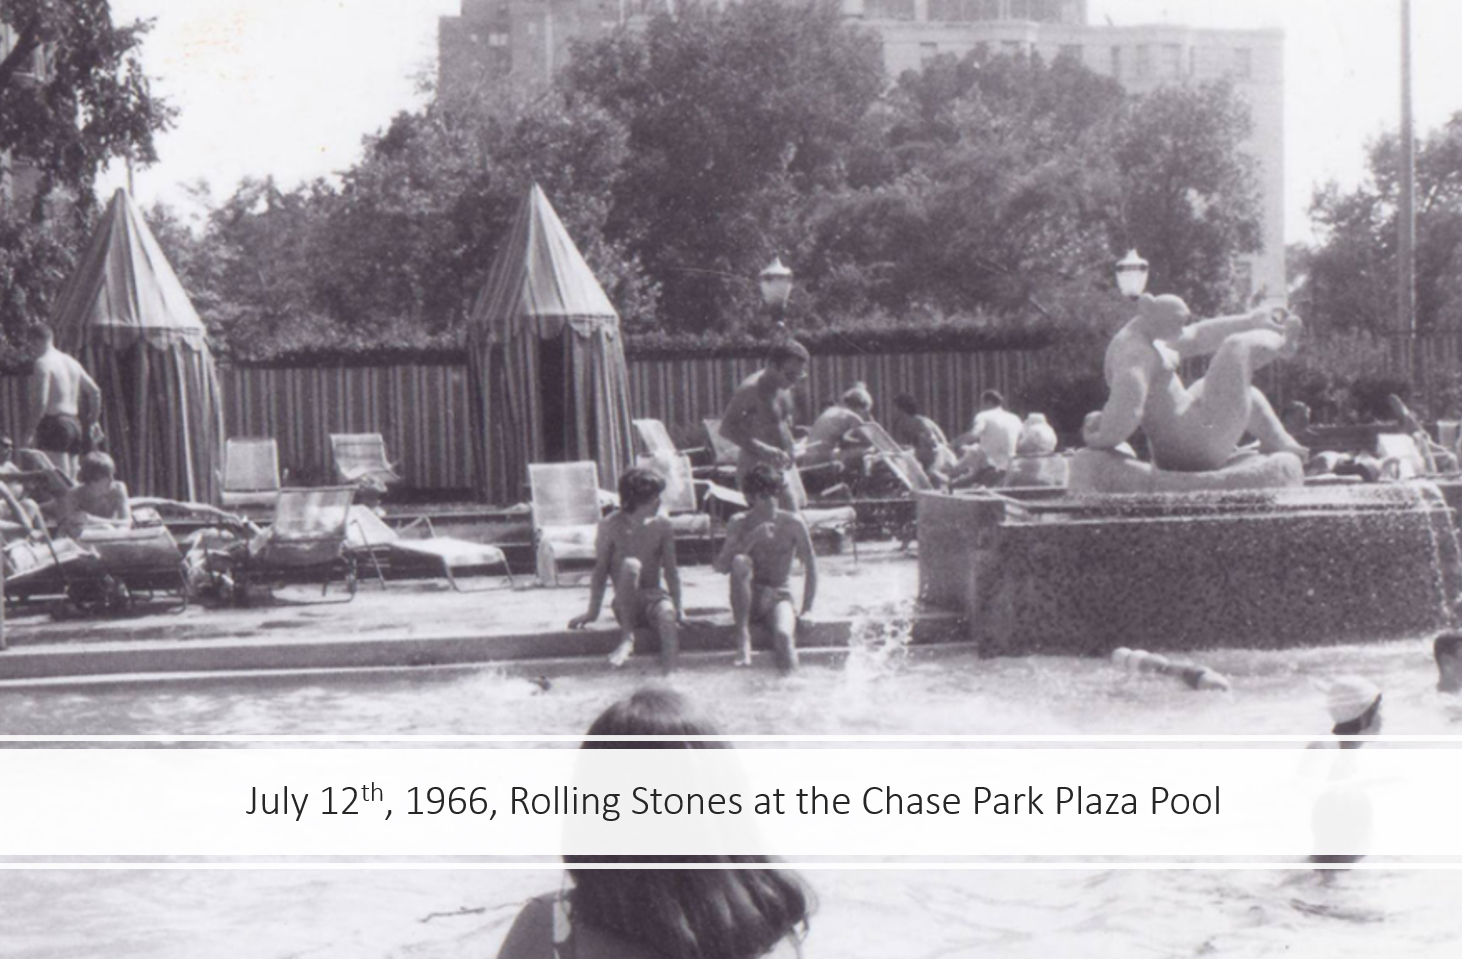 black and white image of The Chase pool party; copy overlay noting it's the July 1966 Rolling Stones Pool party